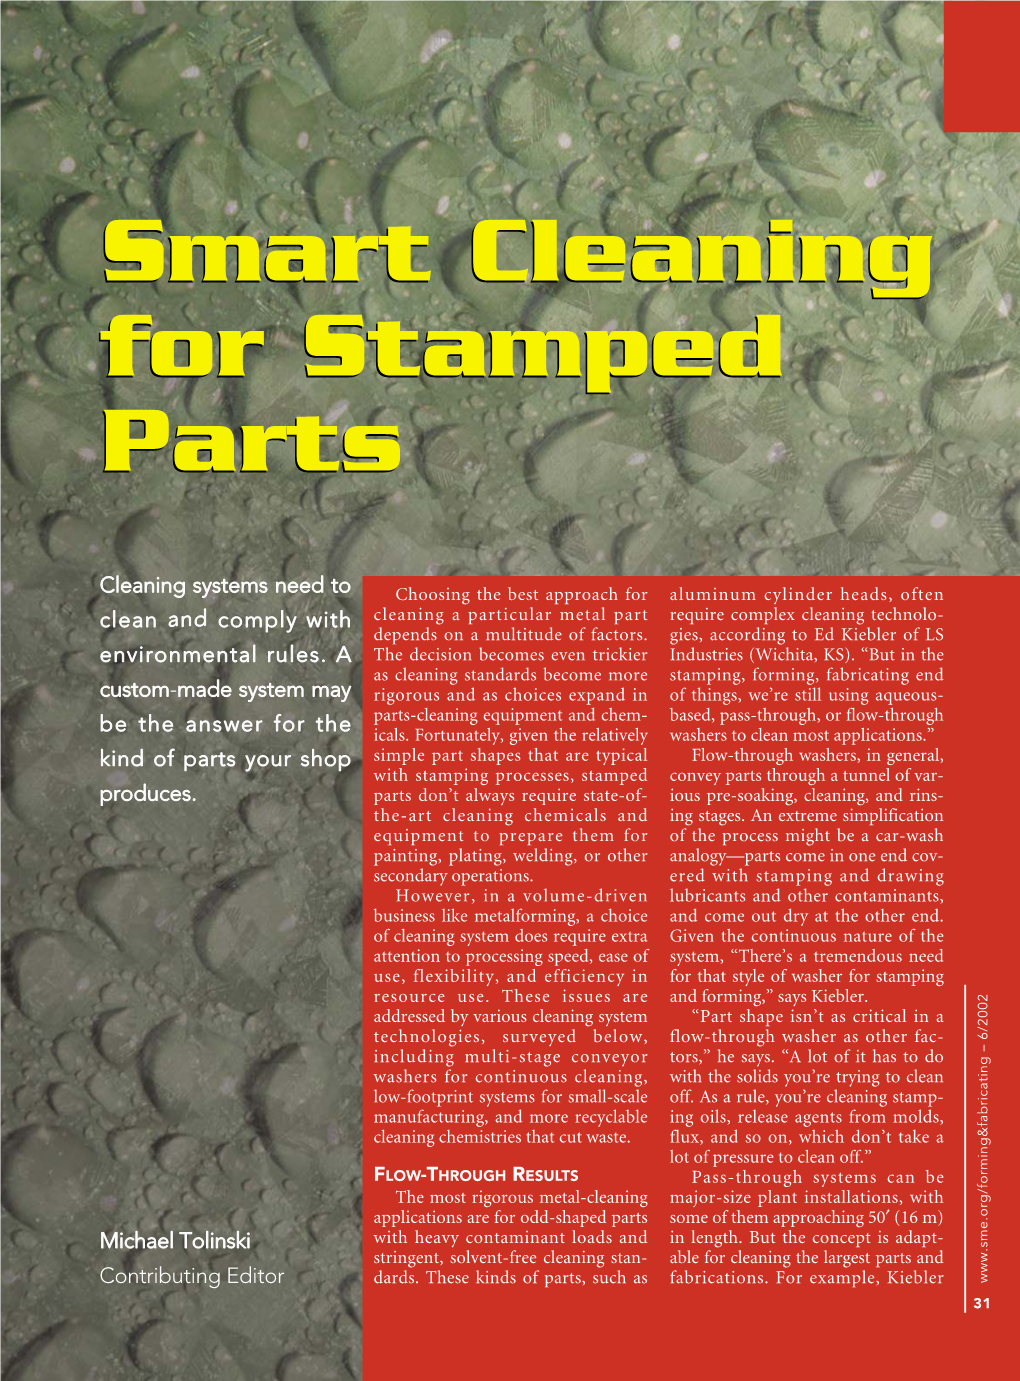 Smart Cleaning for Stamped Parts